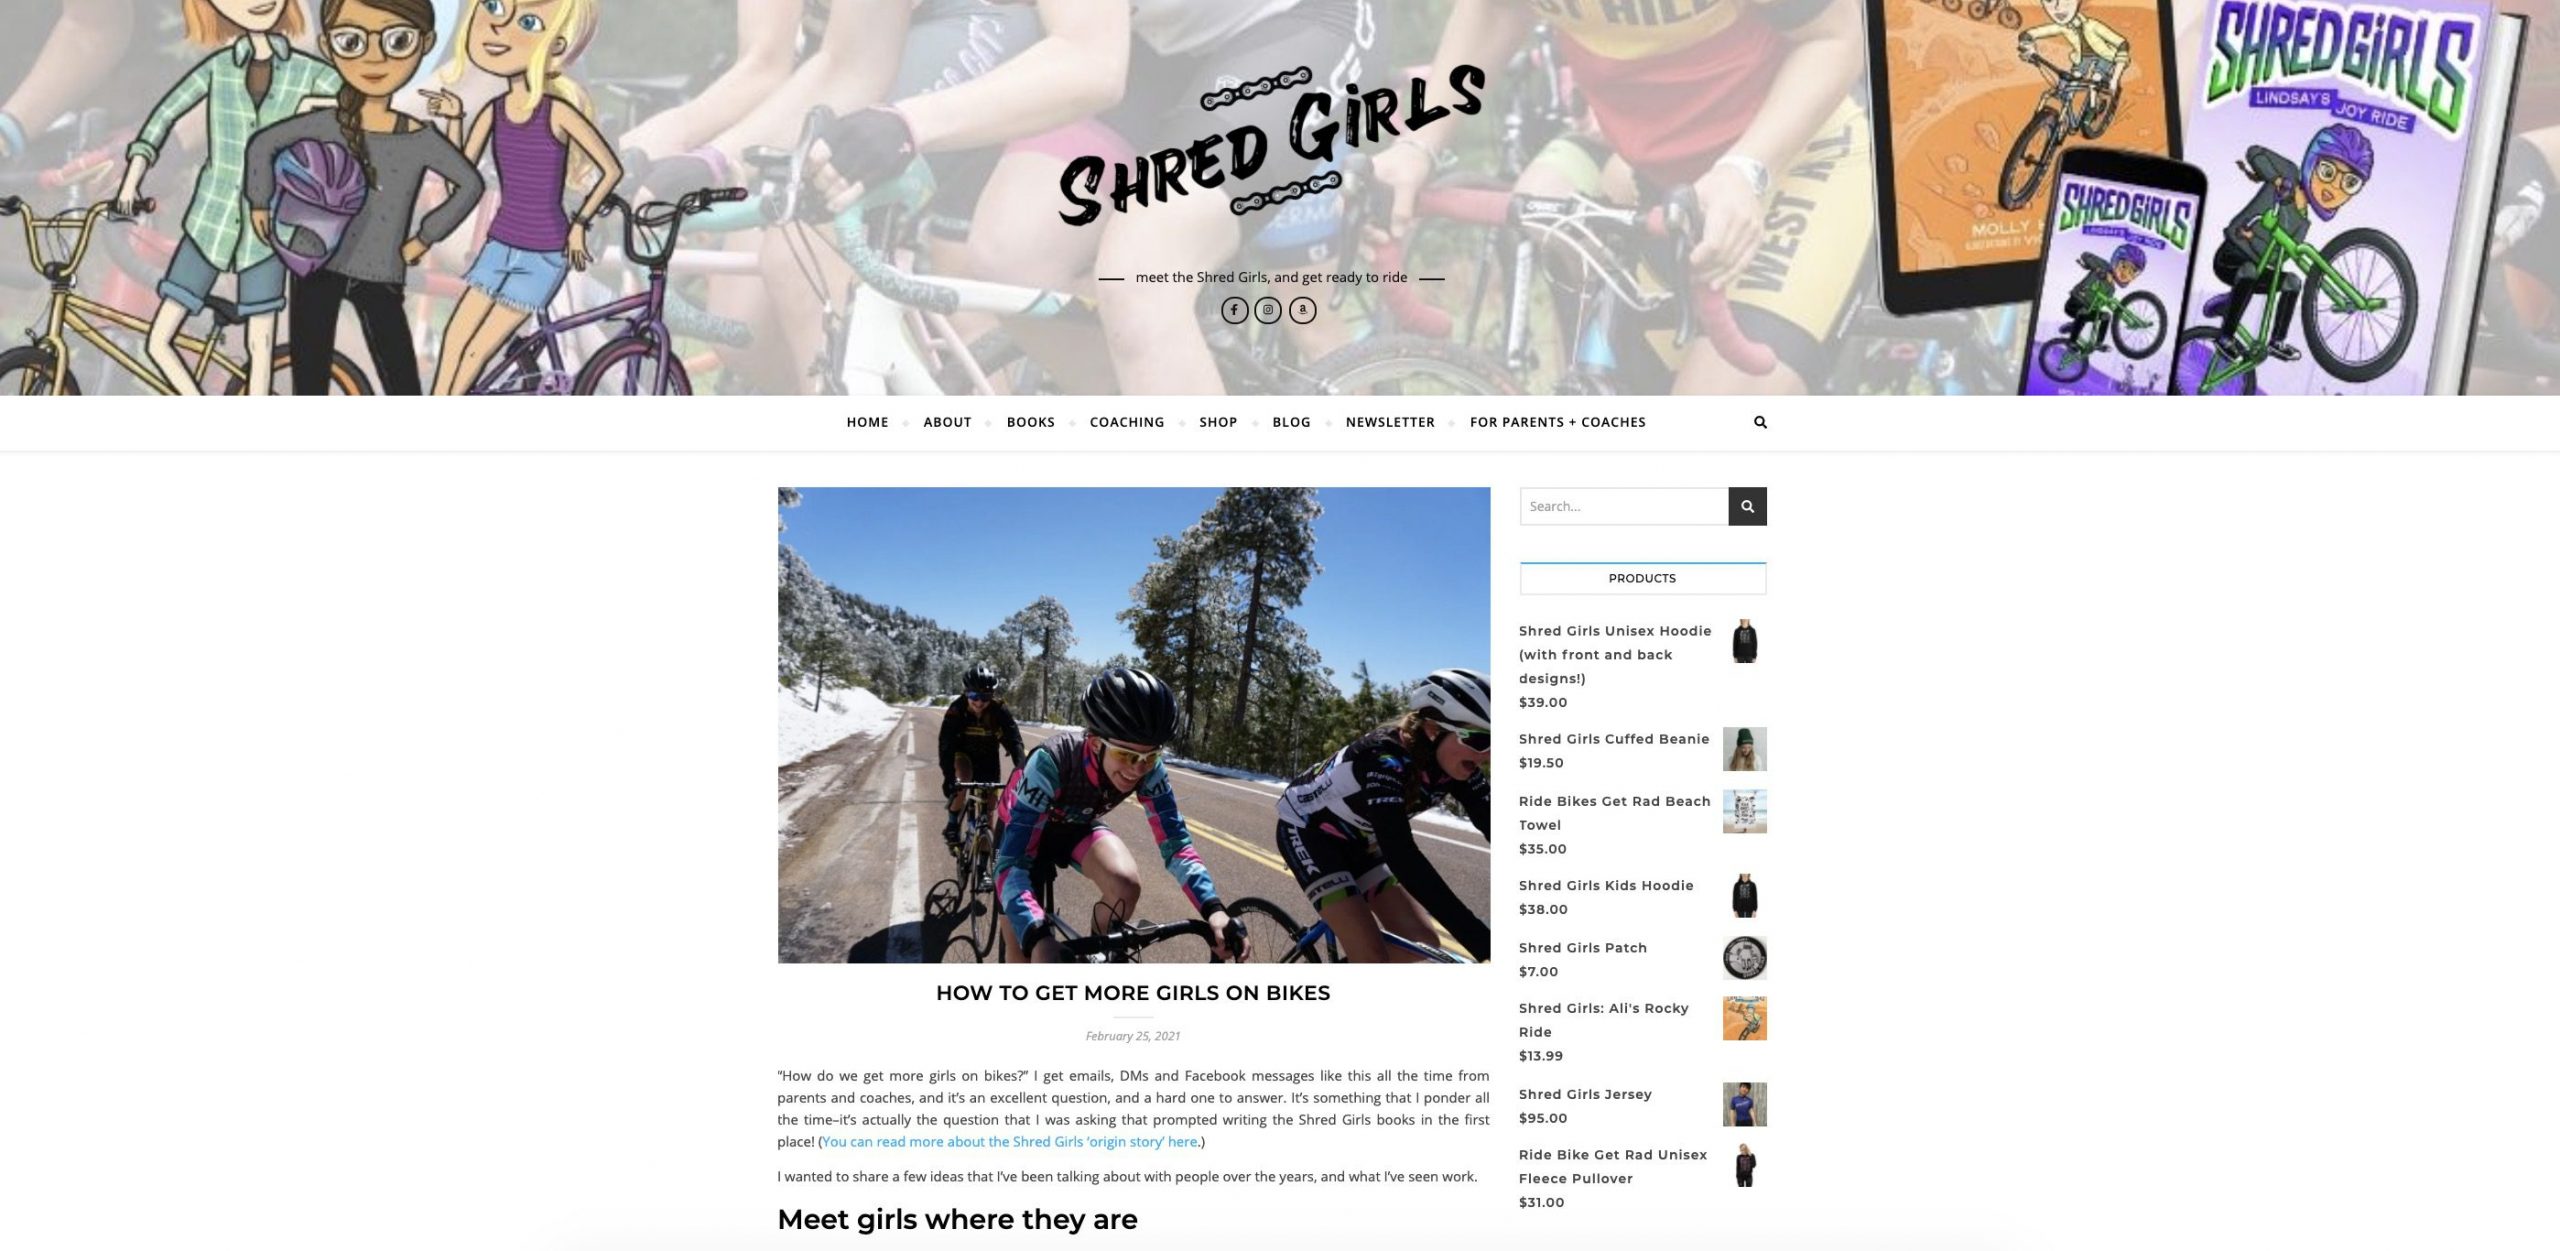 A blog article titled "How to Get More Girls on Bikes" is displayed on the Shred Girls website. The webpage includes a banner with an illustration of girls with bikes, a navigation menu, and an article accompanied by a cycling image and related merchandise on the sidebar.